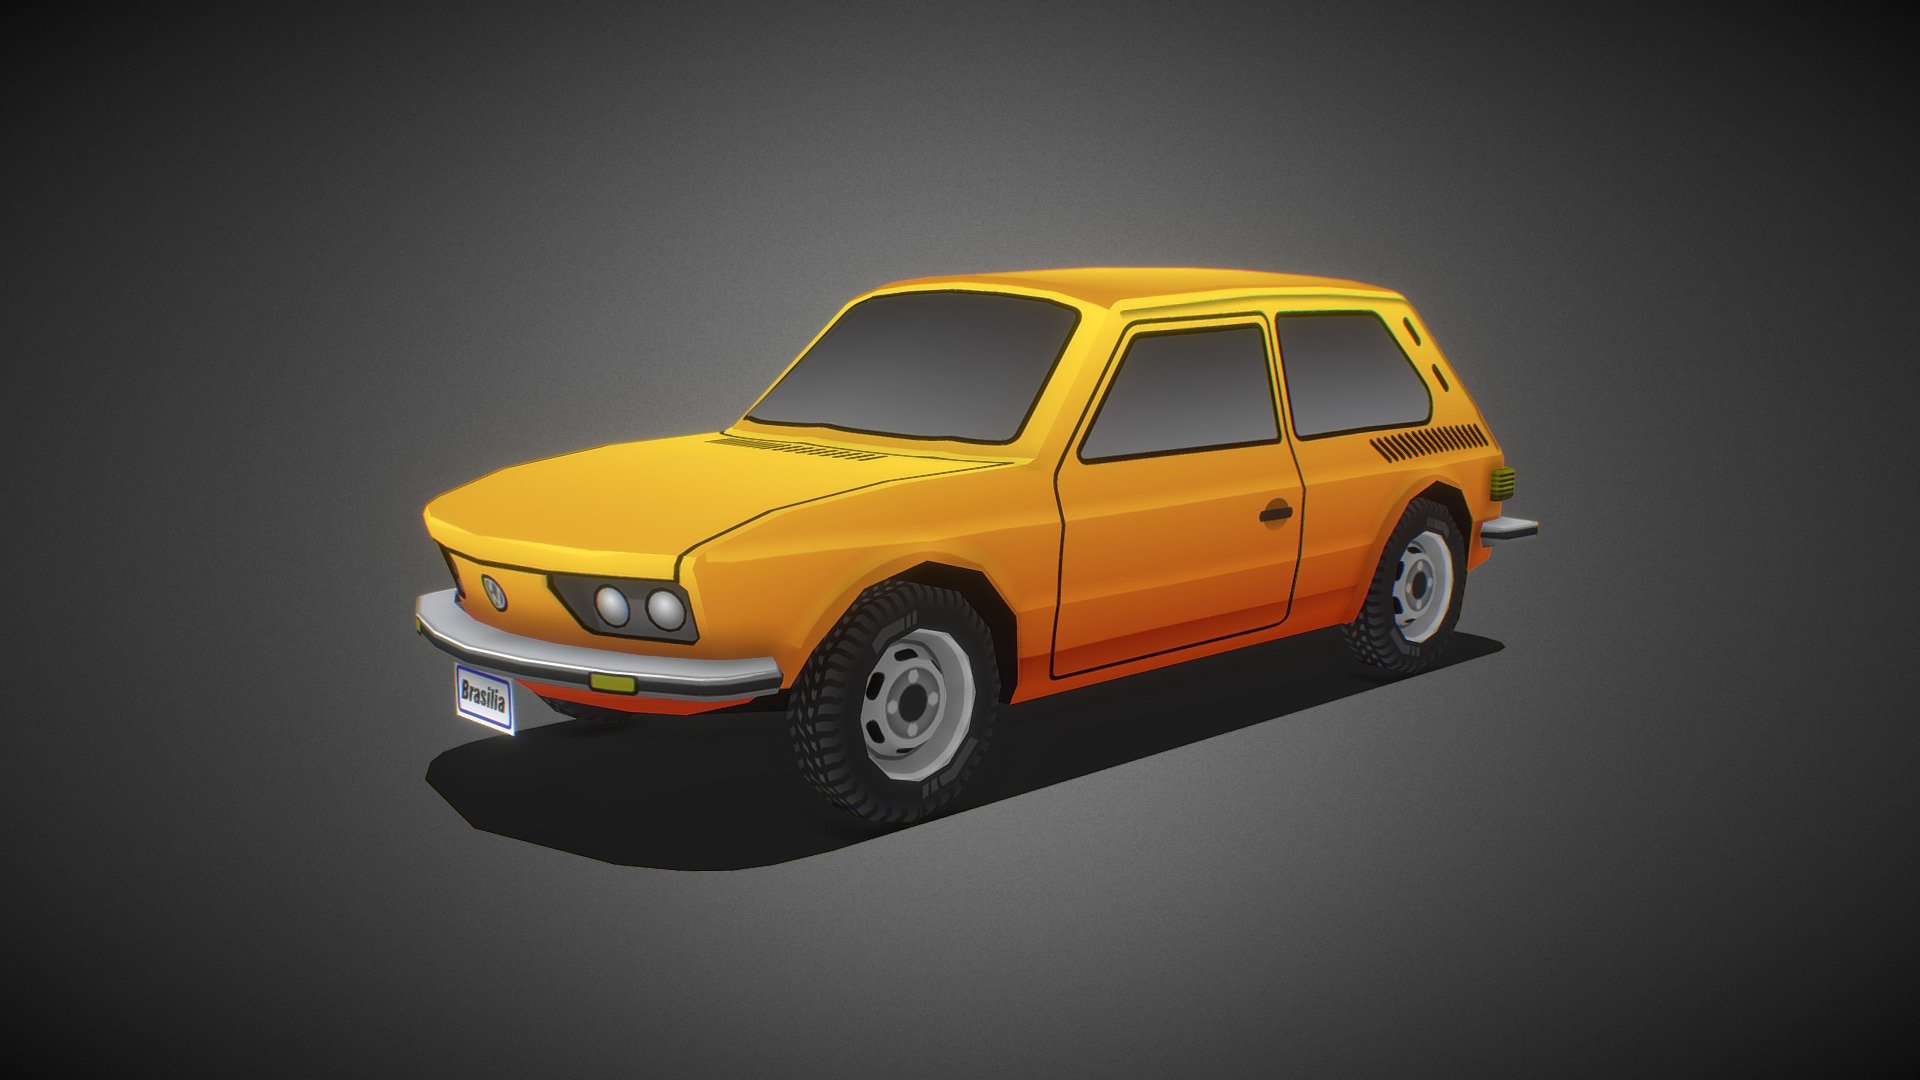 Brasilia was a cute c-segment car designed and made by Brazilian Volkswagen branch, only availble in LATAM markets. Was also rear engine and RWD like the beetle, and shared a lot of parts with it, like the engine itself, headlights, interiors, etc.
This was made after 70s version. Its game-ready, very lowpoly, non-overlapping fully unwrapped.
Modelled in Blender 3.5.0. Texture made in Adobe Illustrator. 
1.6k faces. 1 color PNG texture. 1 opacity PNG texture. 1 UVs PNG texture. 1 AI Illustrator file included 3d model